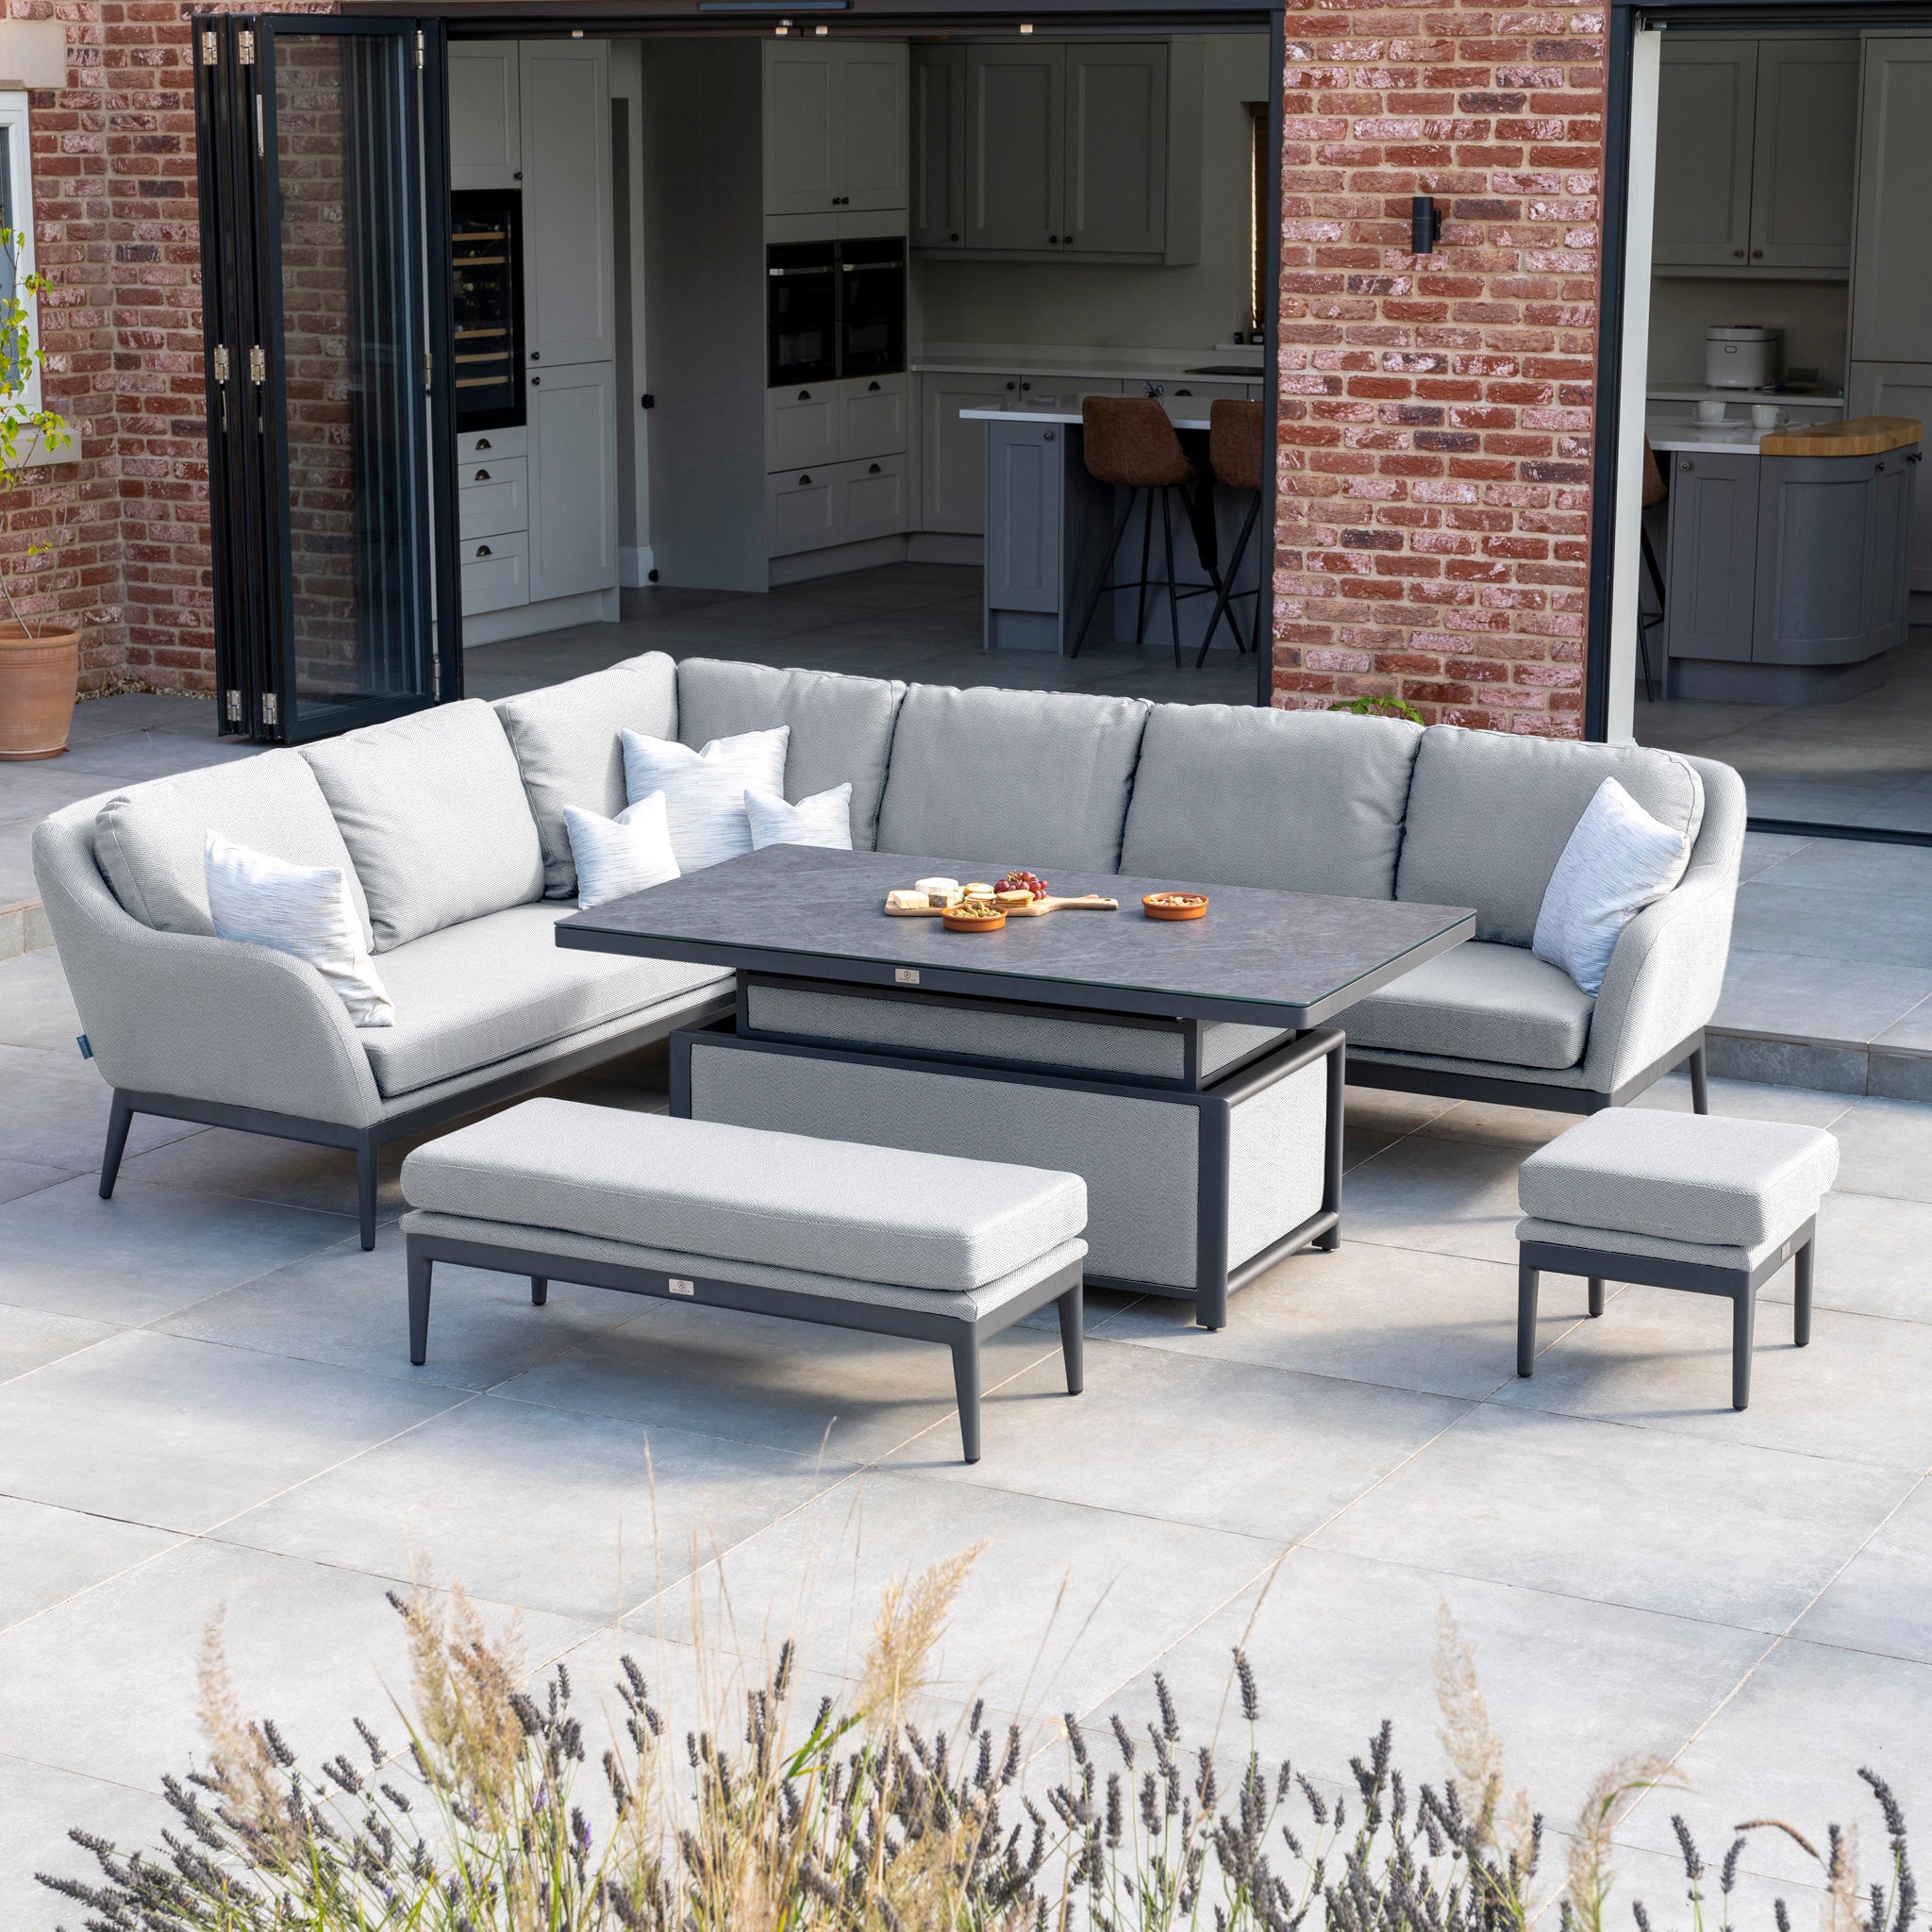 Luna Outdoor Fabric Rectangular Corner Dining Set with Rising Table in Oyster Grey (Left Hand)